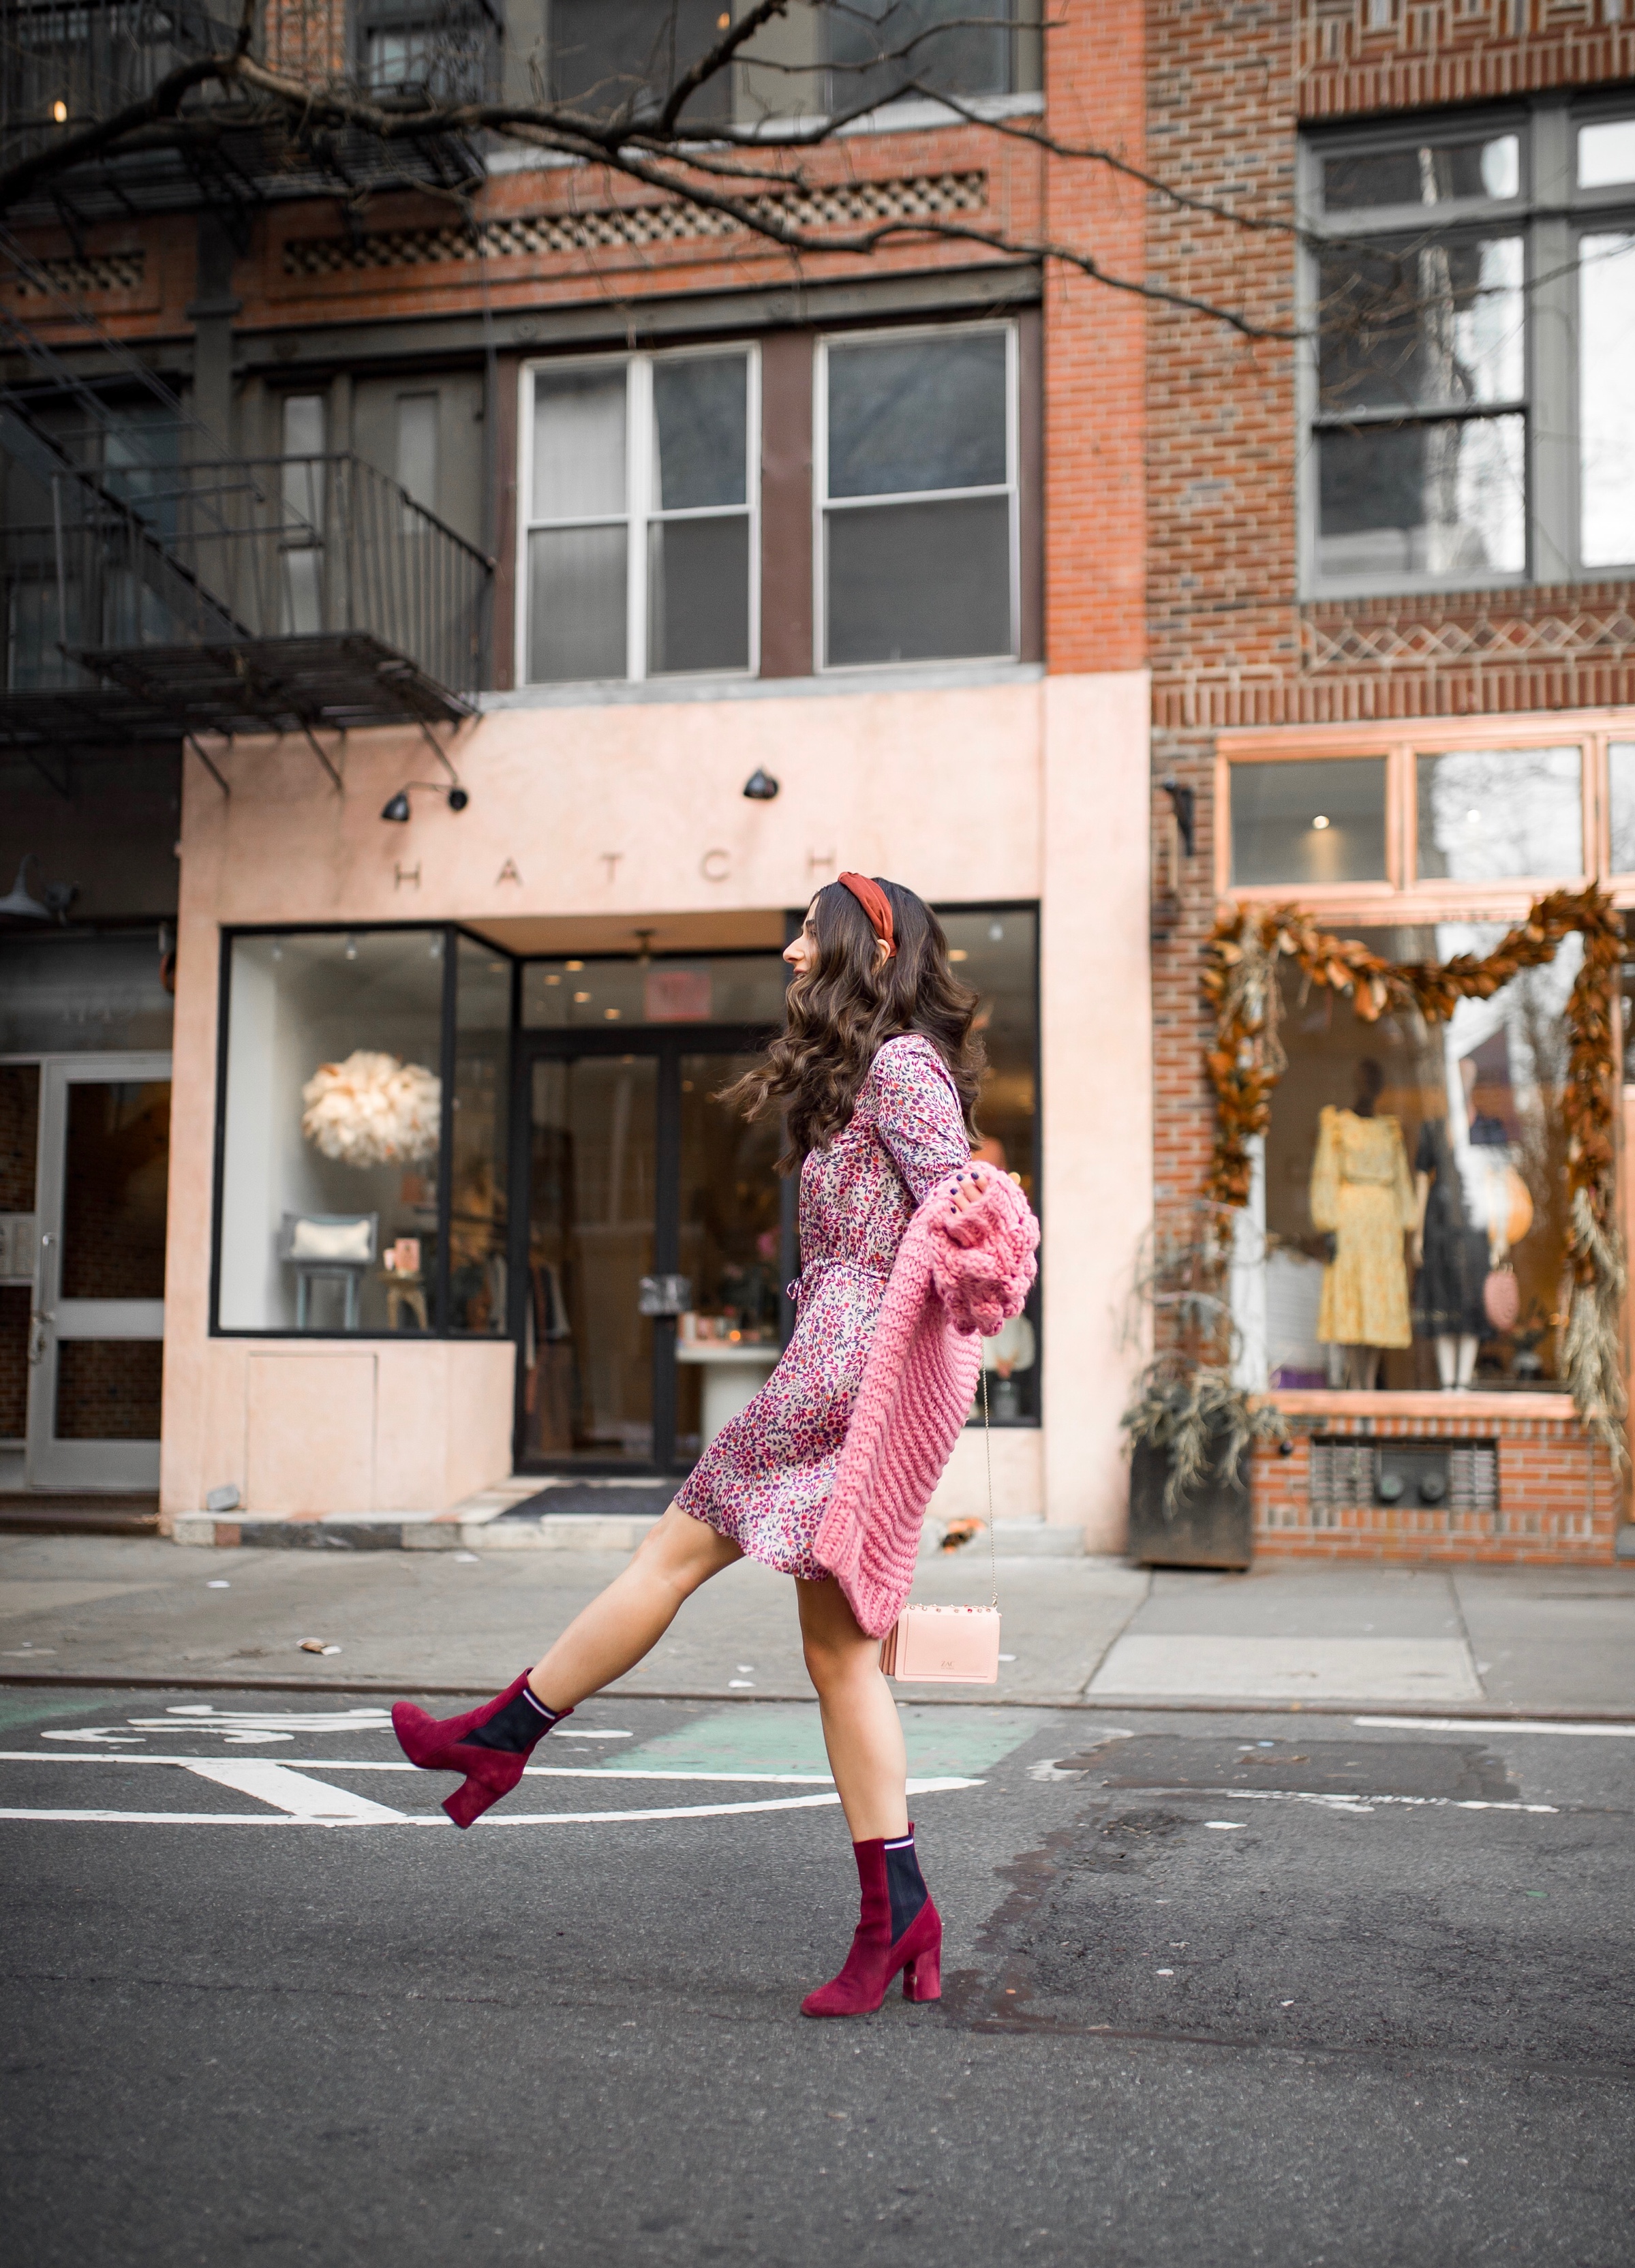 How Being In A Miserable Job Shaped My Entire Career Silk Floral Dress + Pink Pom Pom Sweater Esther Santer Fashion Blog NYC Street Style Blogger Outfit OOTD Trendy Shopping Mango Sale  Winter How To Wear Maroon Velvet Booties Zac Posen Swarovski Bag.jpg